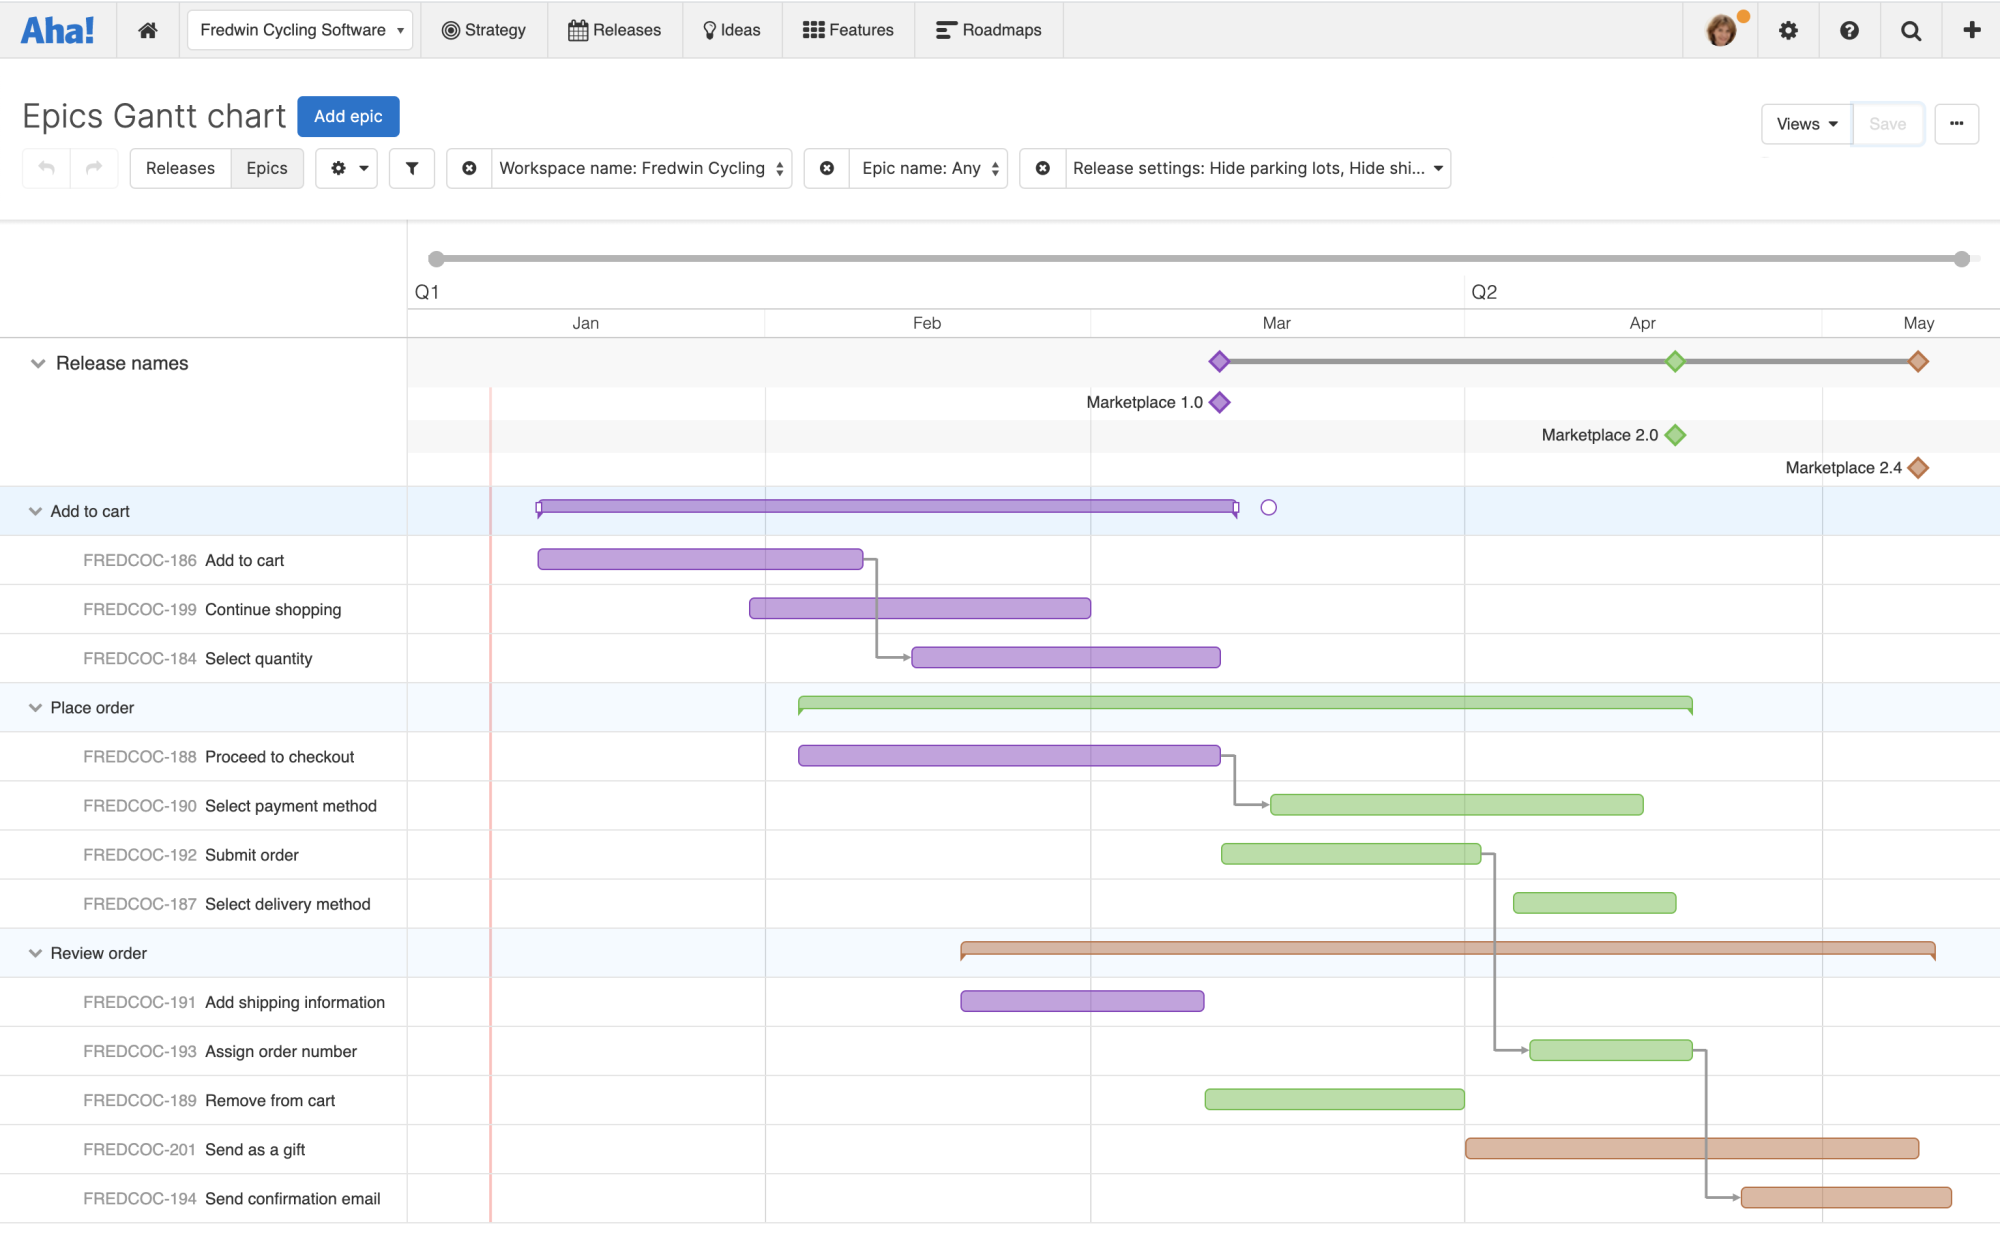 The Gantt chart organized around epics rather than releases.